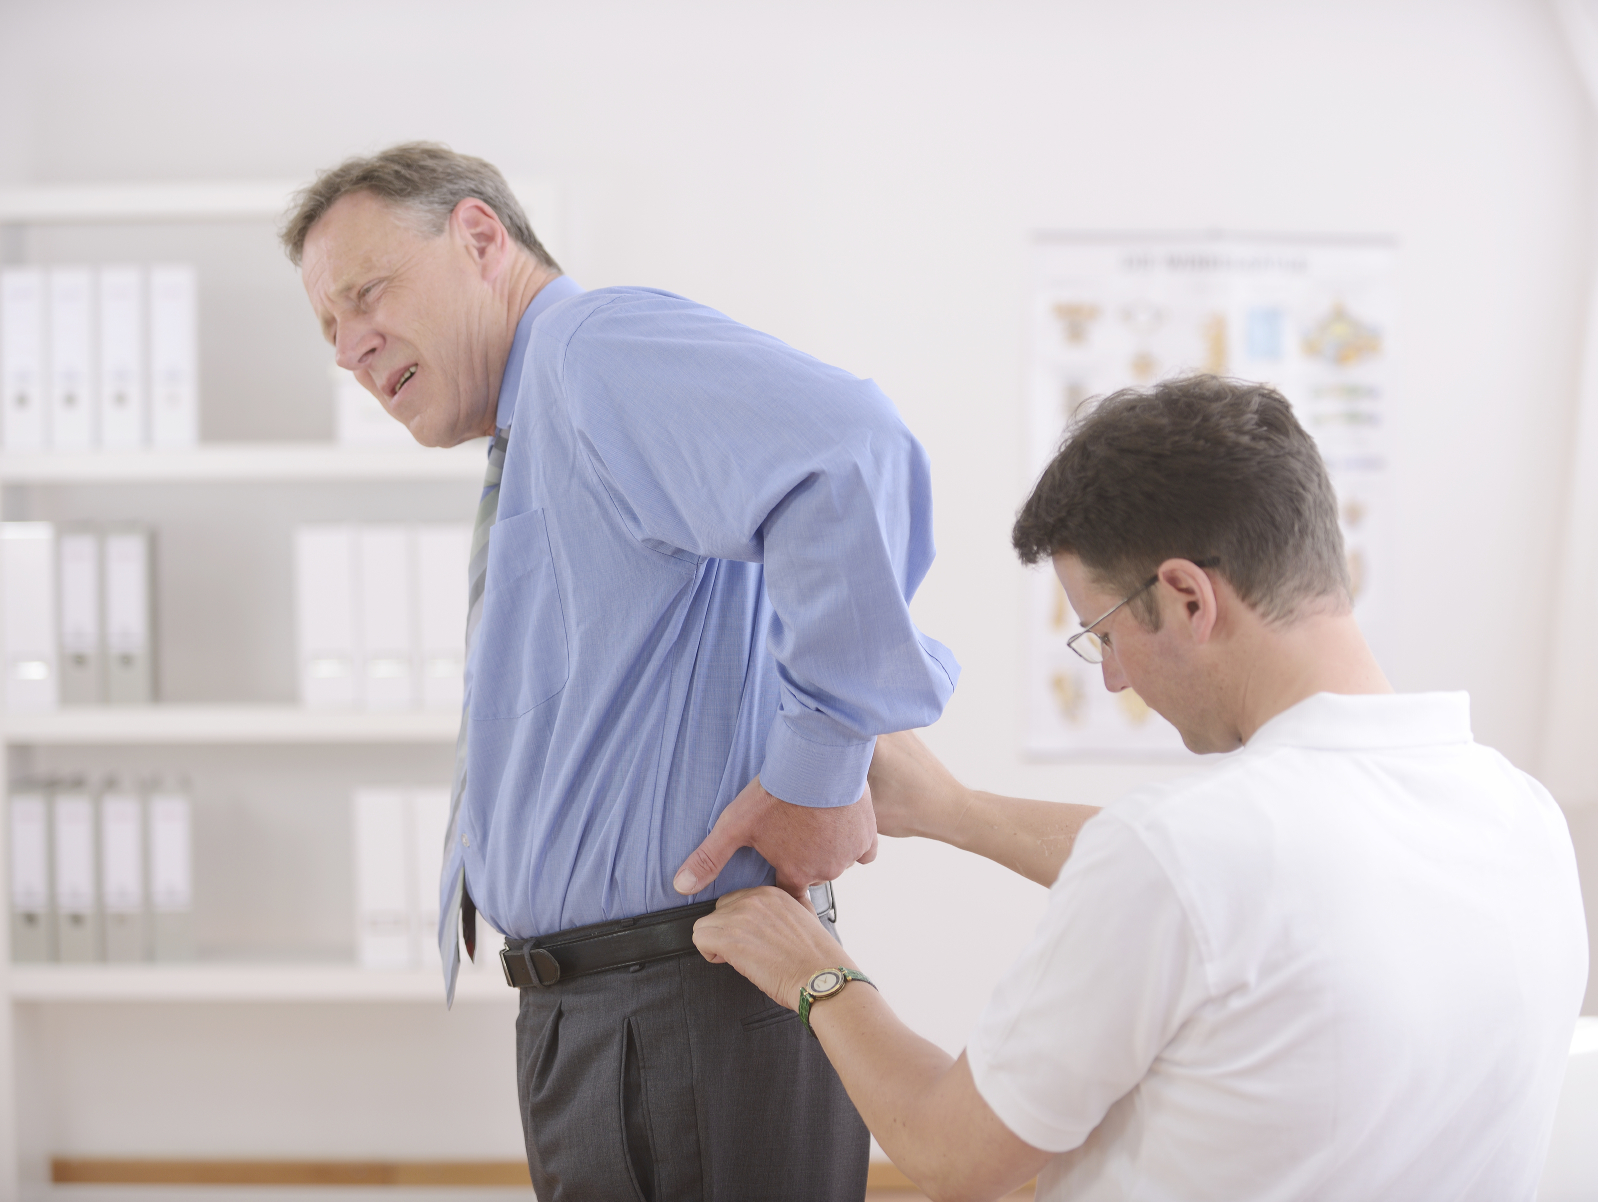 Do you suffer from lower back, hip, or leg pain? Call our chiropractor in Elkridge & Columbia to learn about sciatica treatments to relieve your pain.